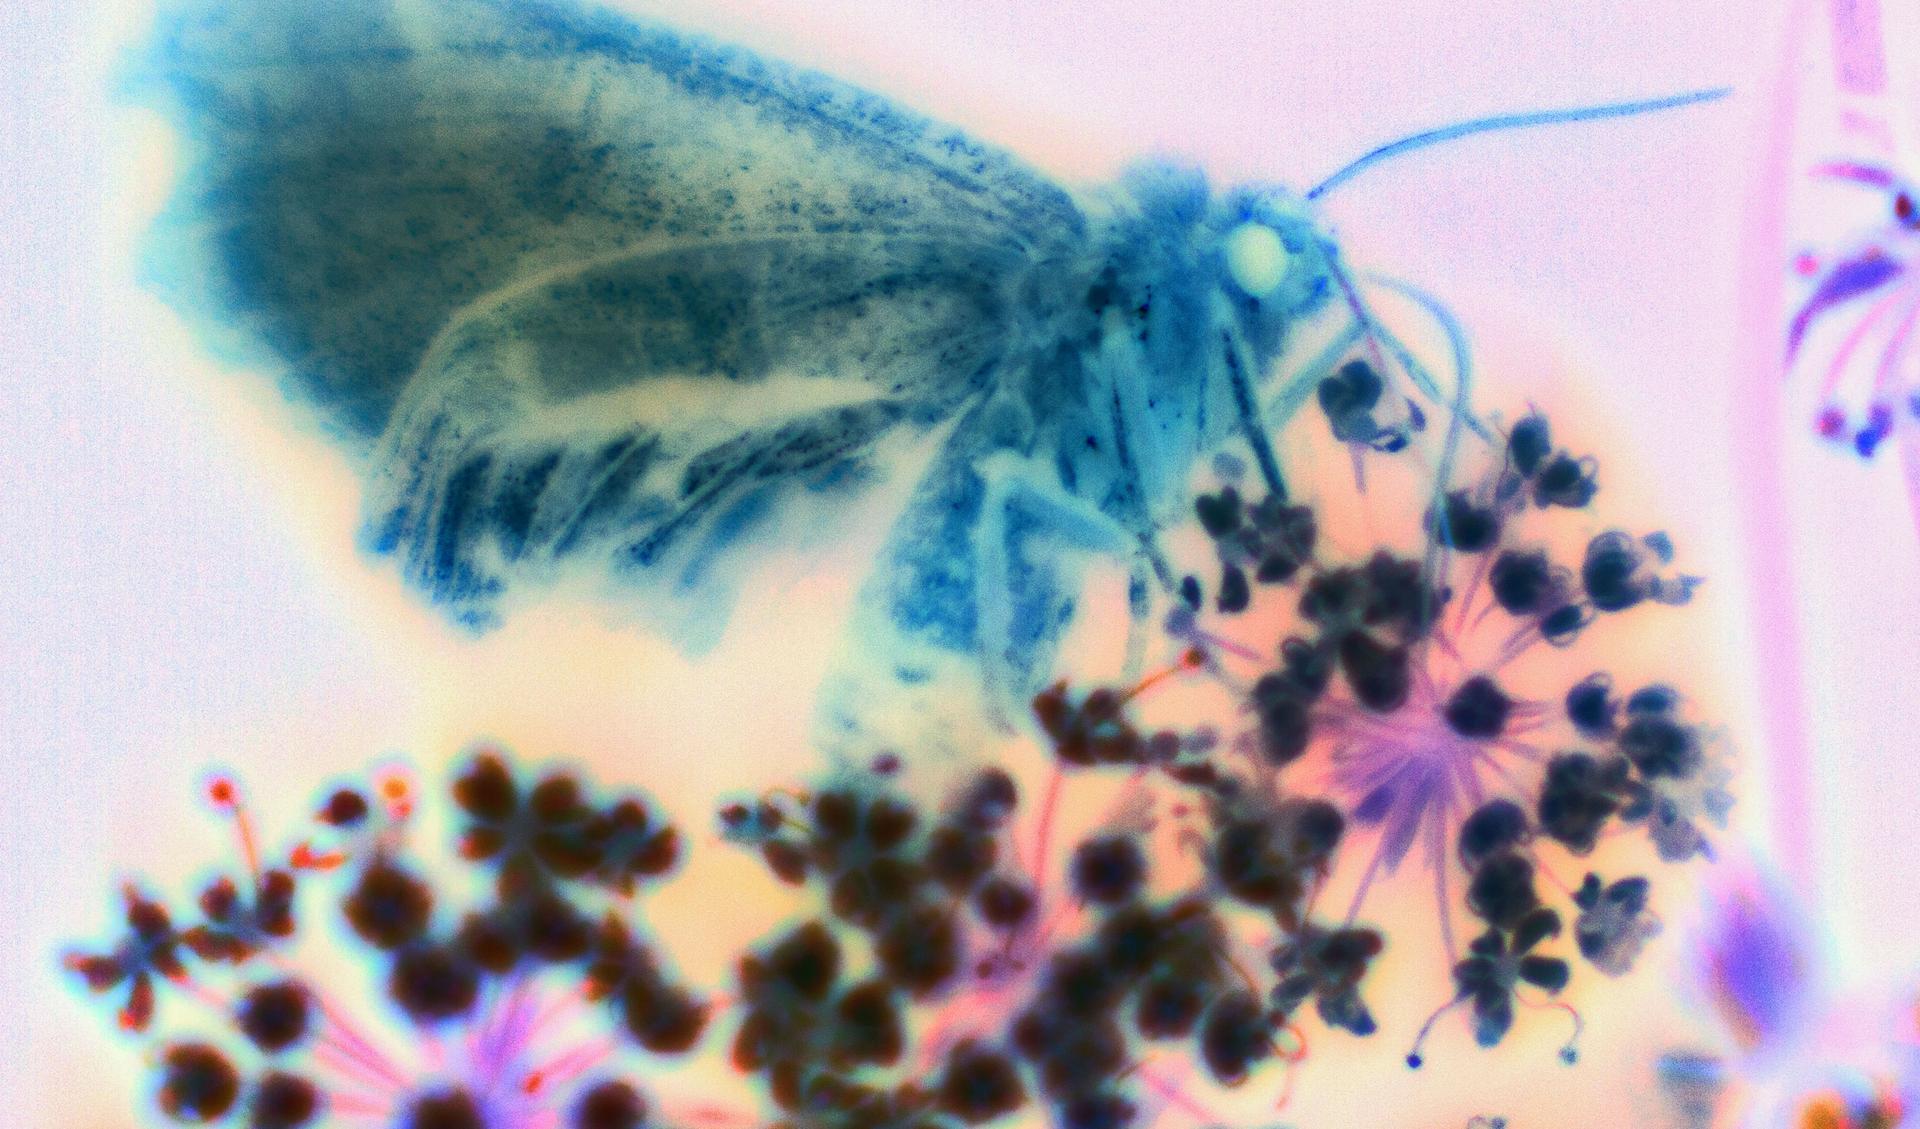 A psychedelic x-ray picture of a moth or butterfly sitting on a plant